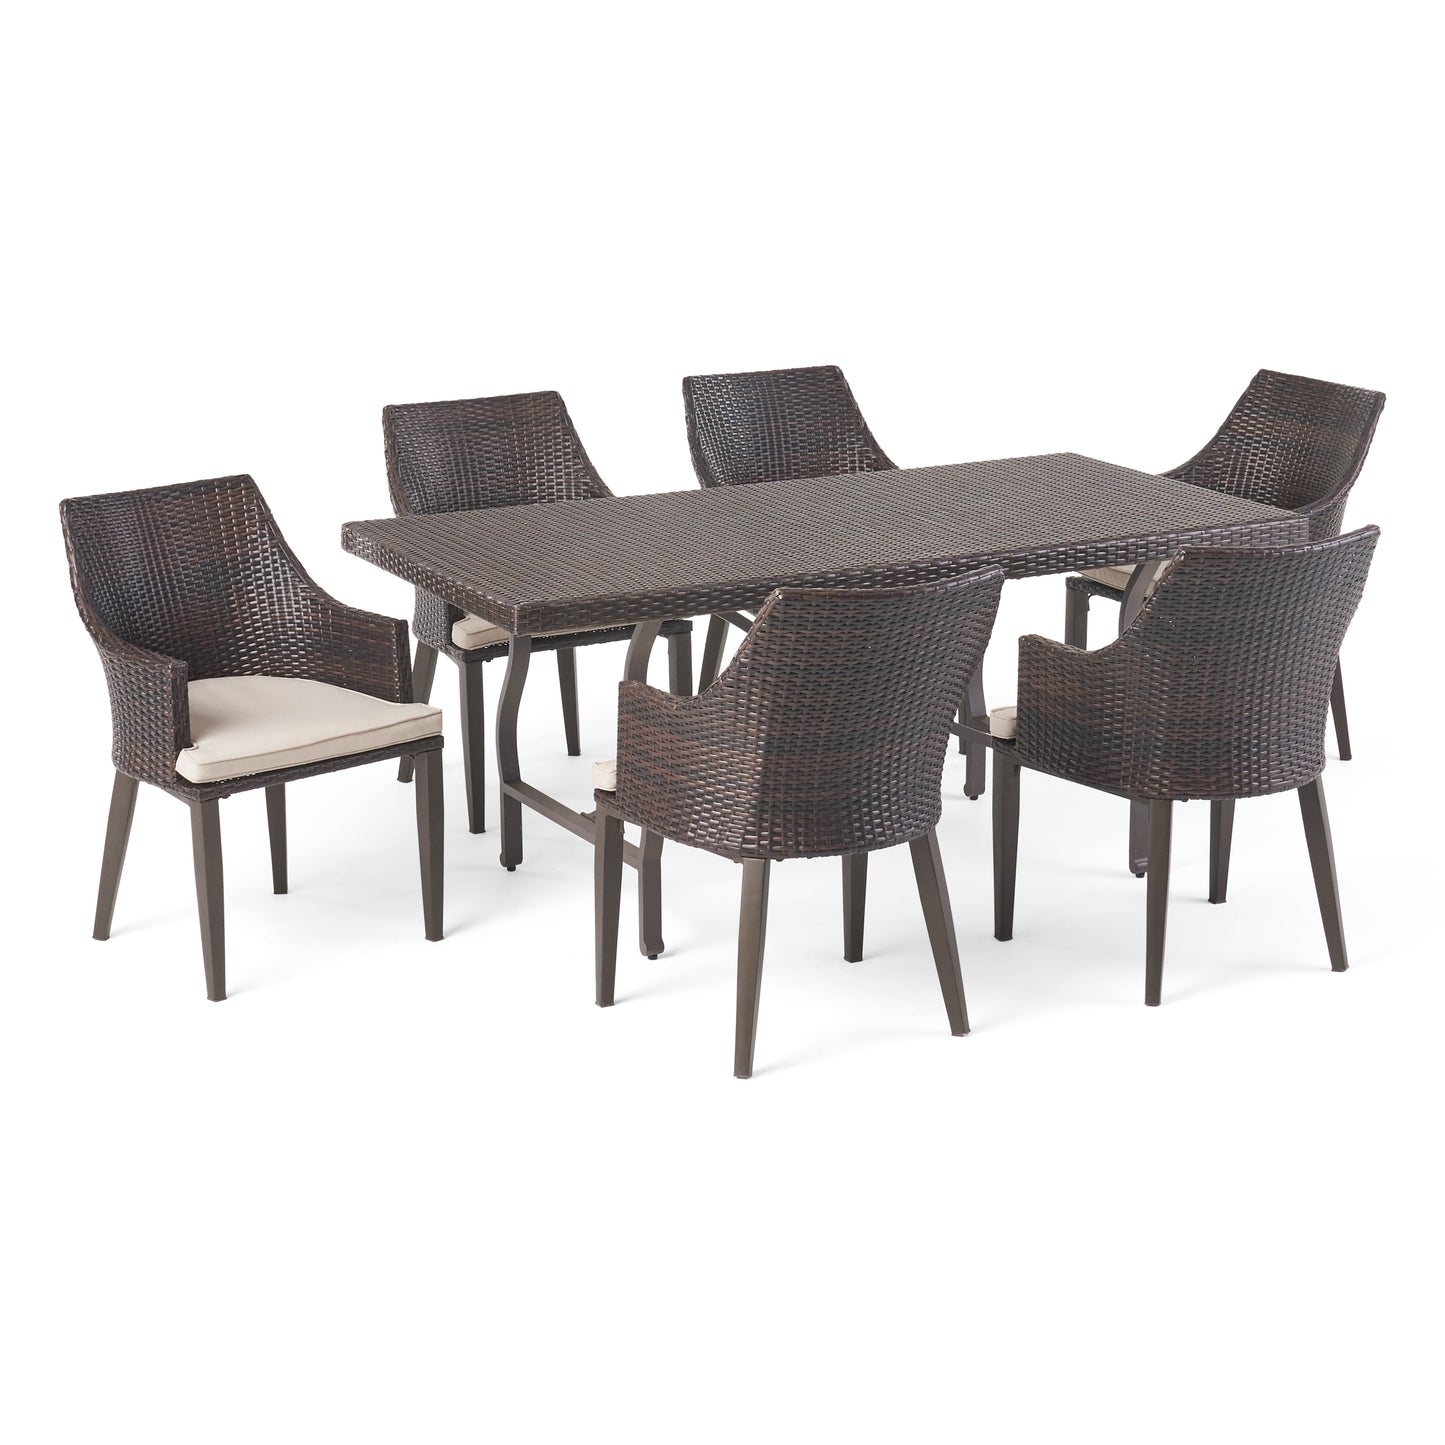 Hartlford Outdoor 7 Piece Wicker Dining Set with Aluminum Framed Dining Table